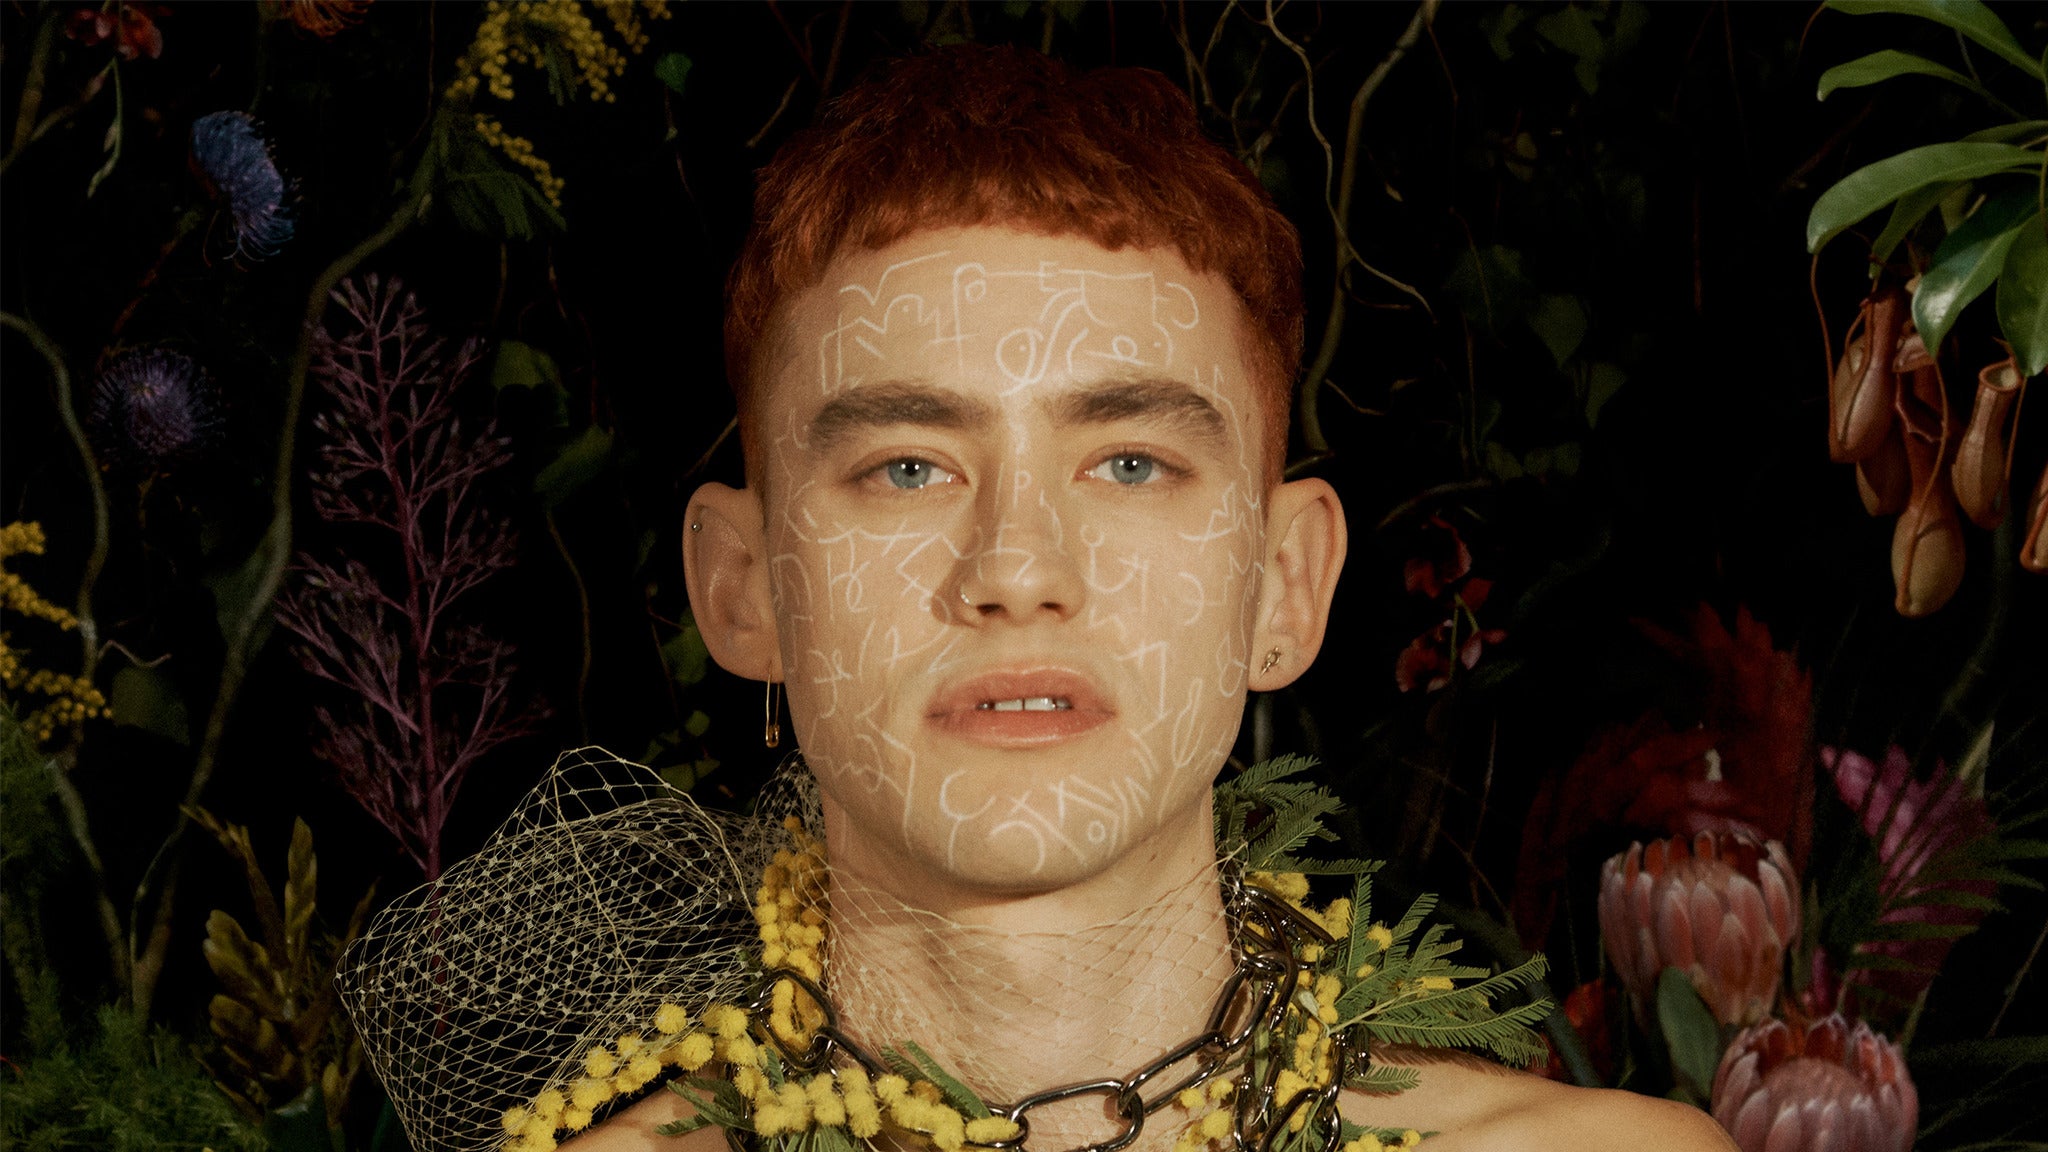 Years & Years in Boston promo photo for Album Pre-Order presale offer code